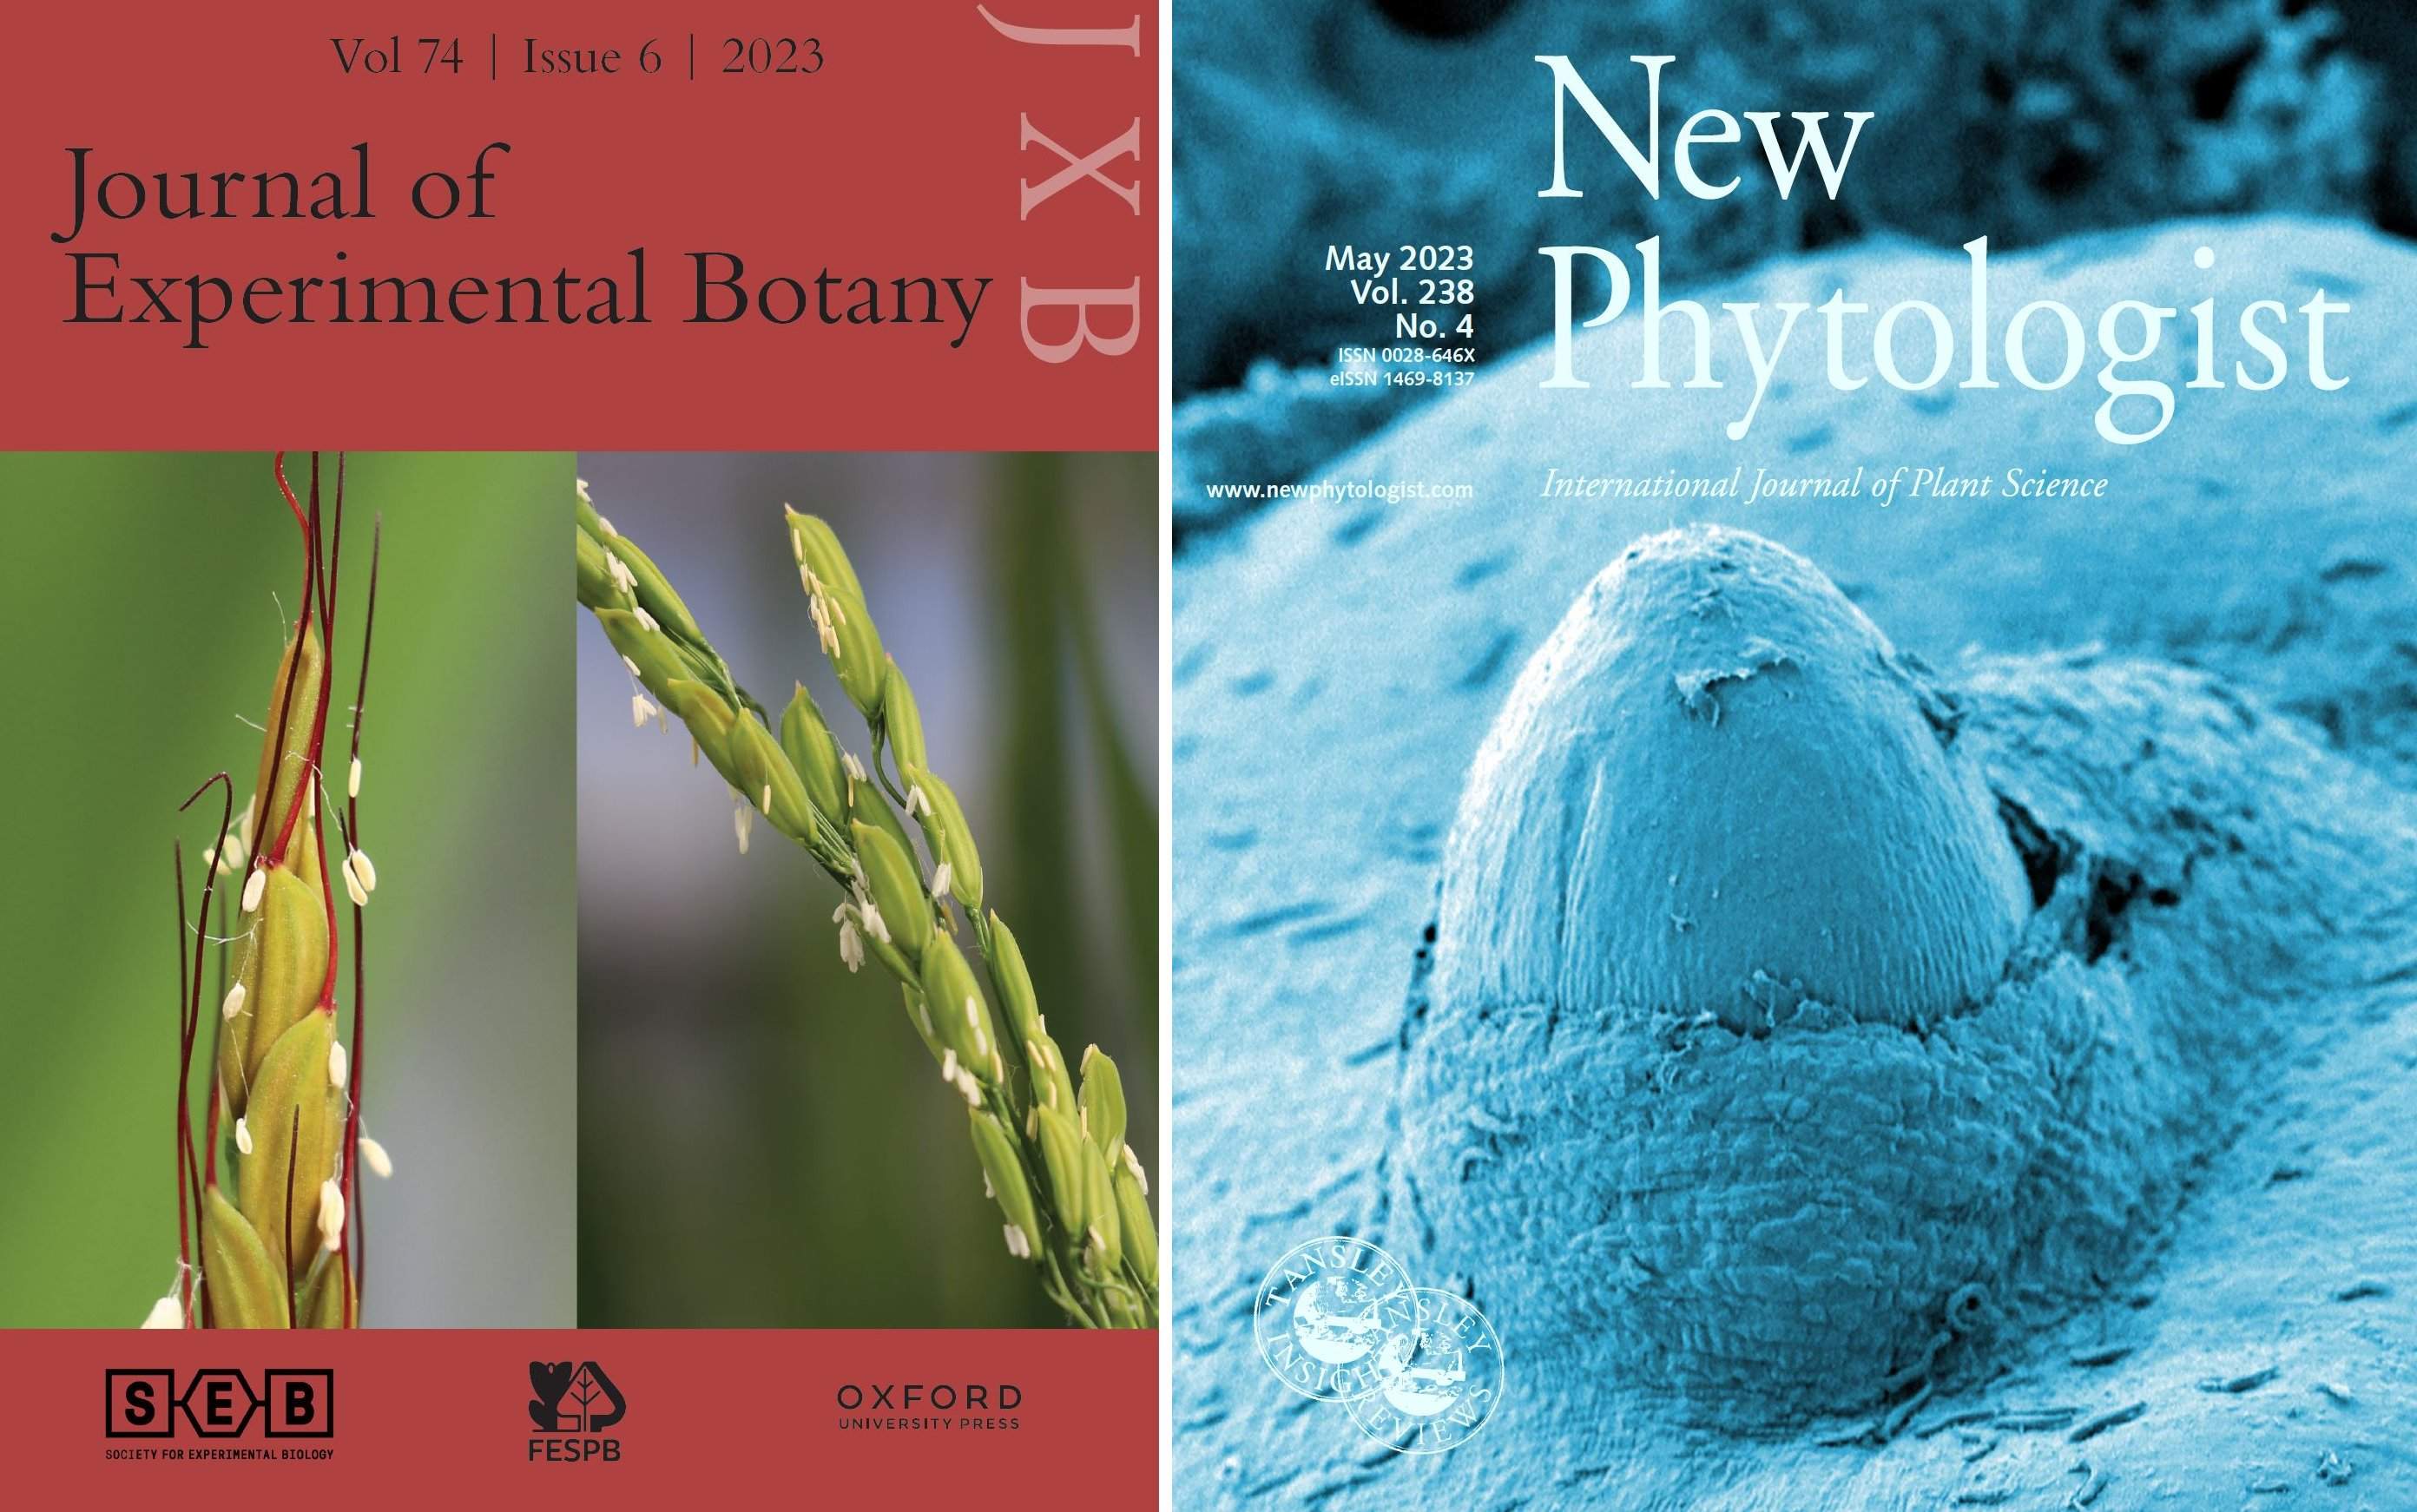 We made to the cover of Journal of Experimental Botany AND New Phytologist